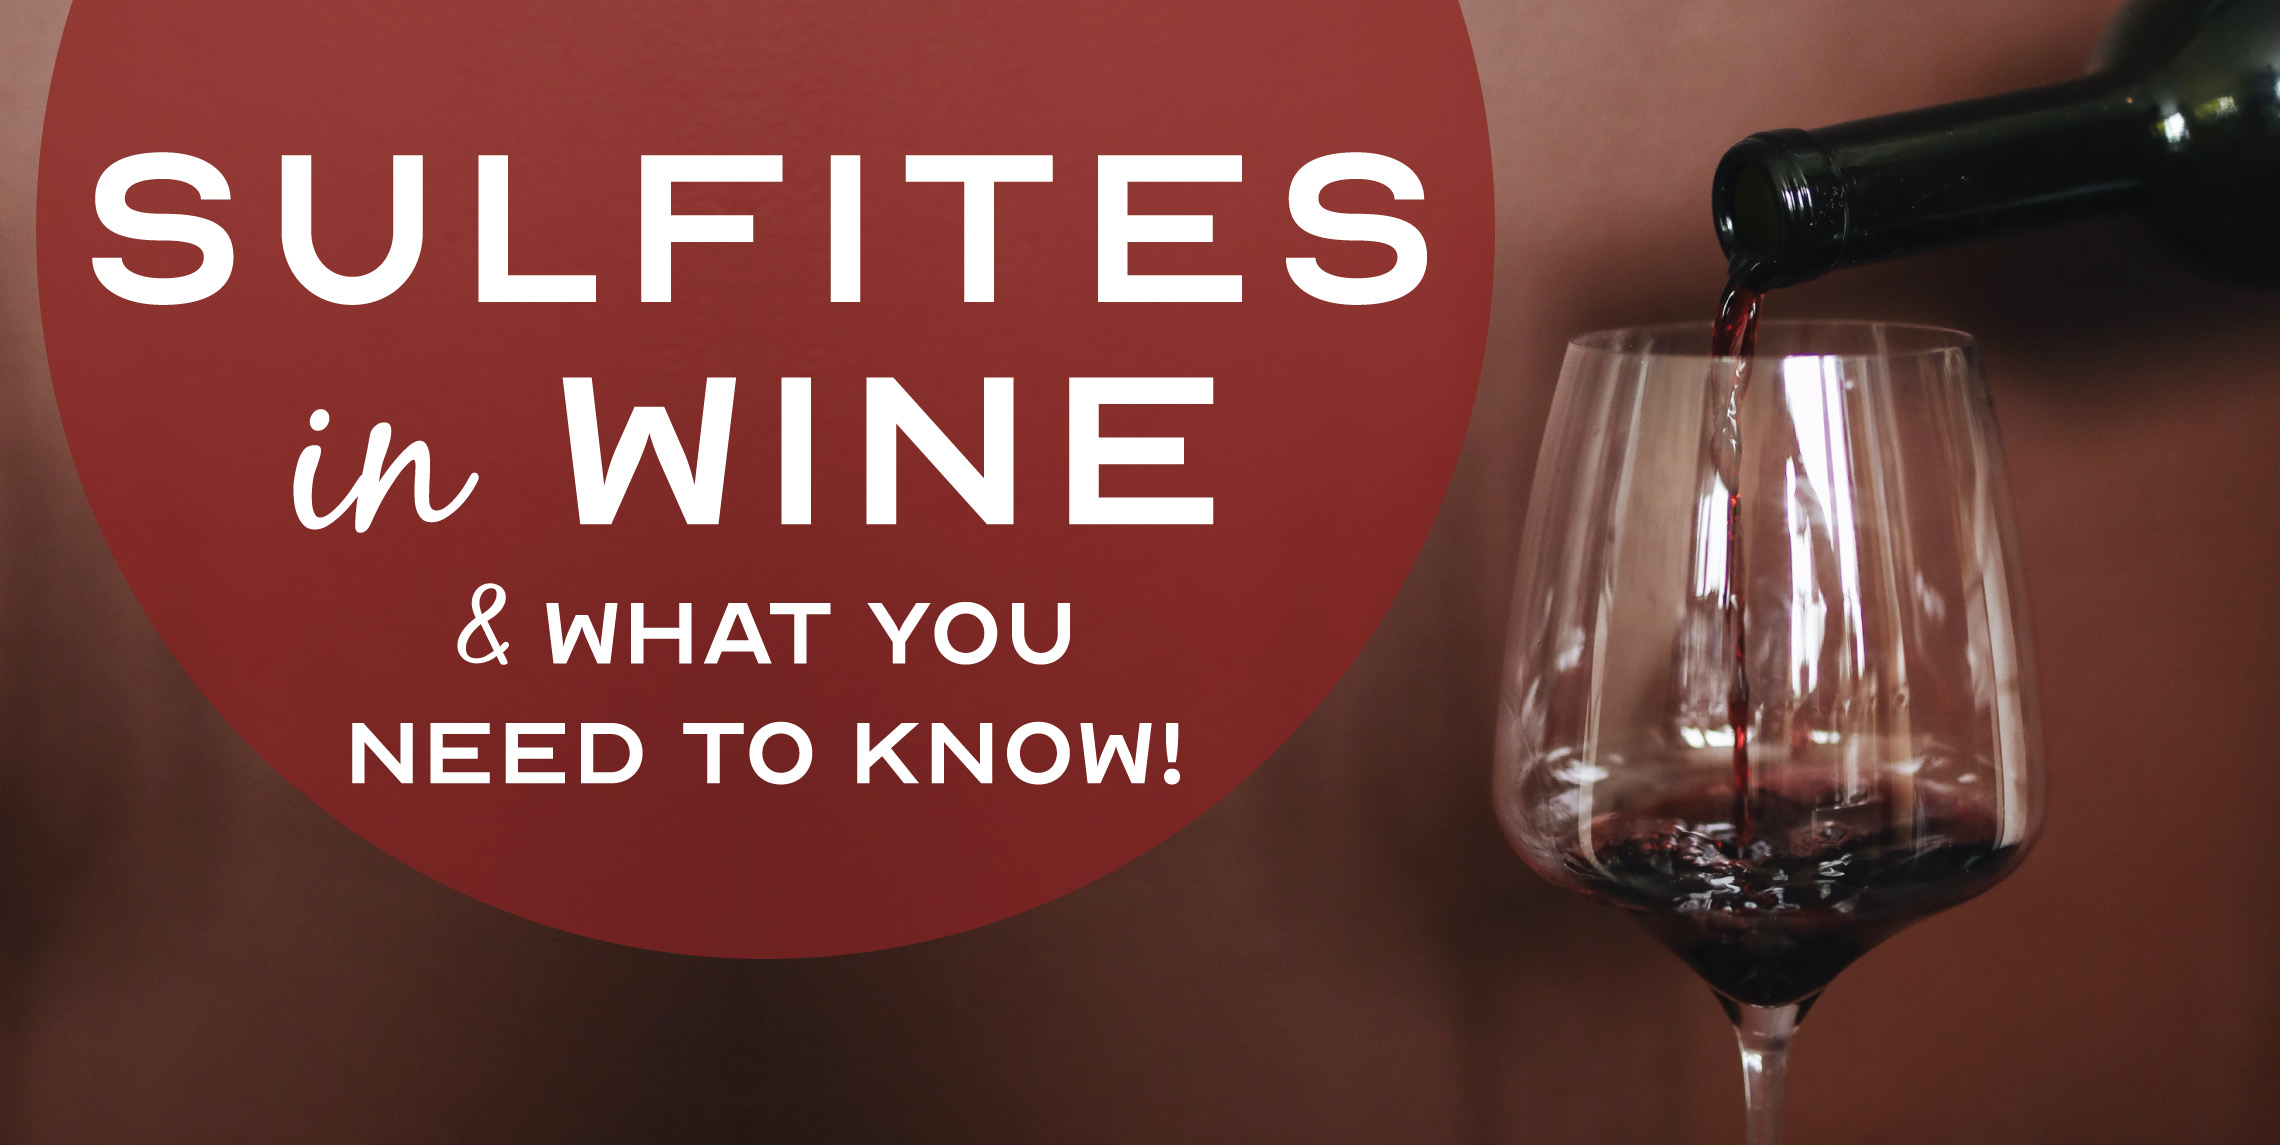 sulfites-in-wine-what-you-need-to-know-mama-jean-s-natural-market